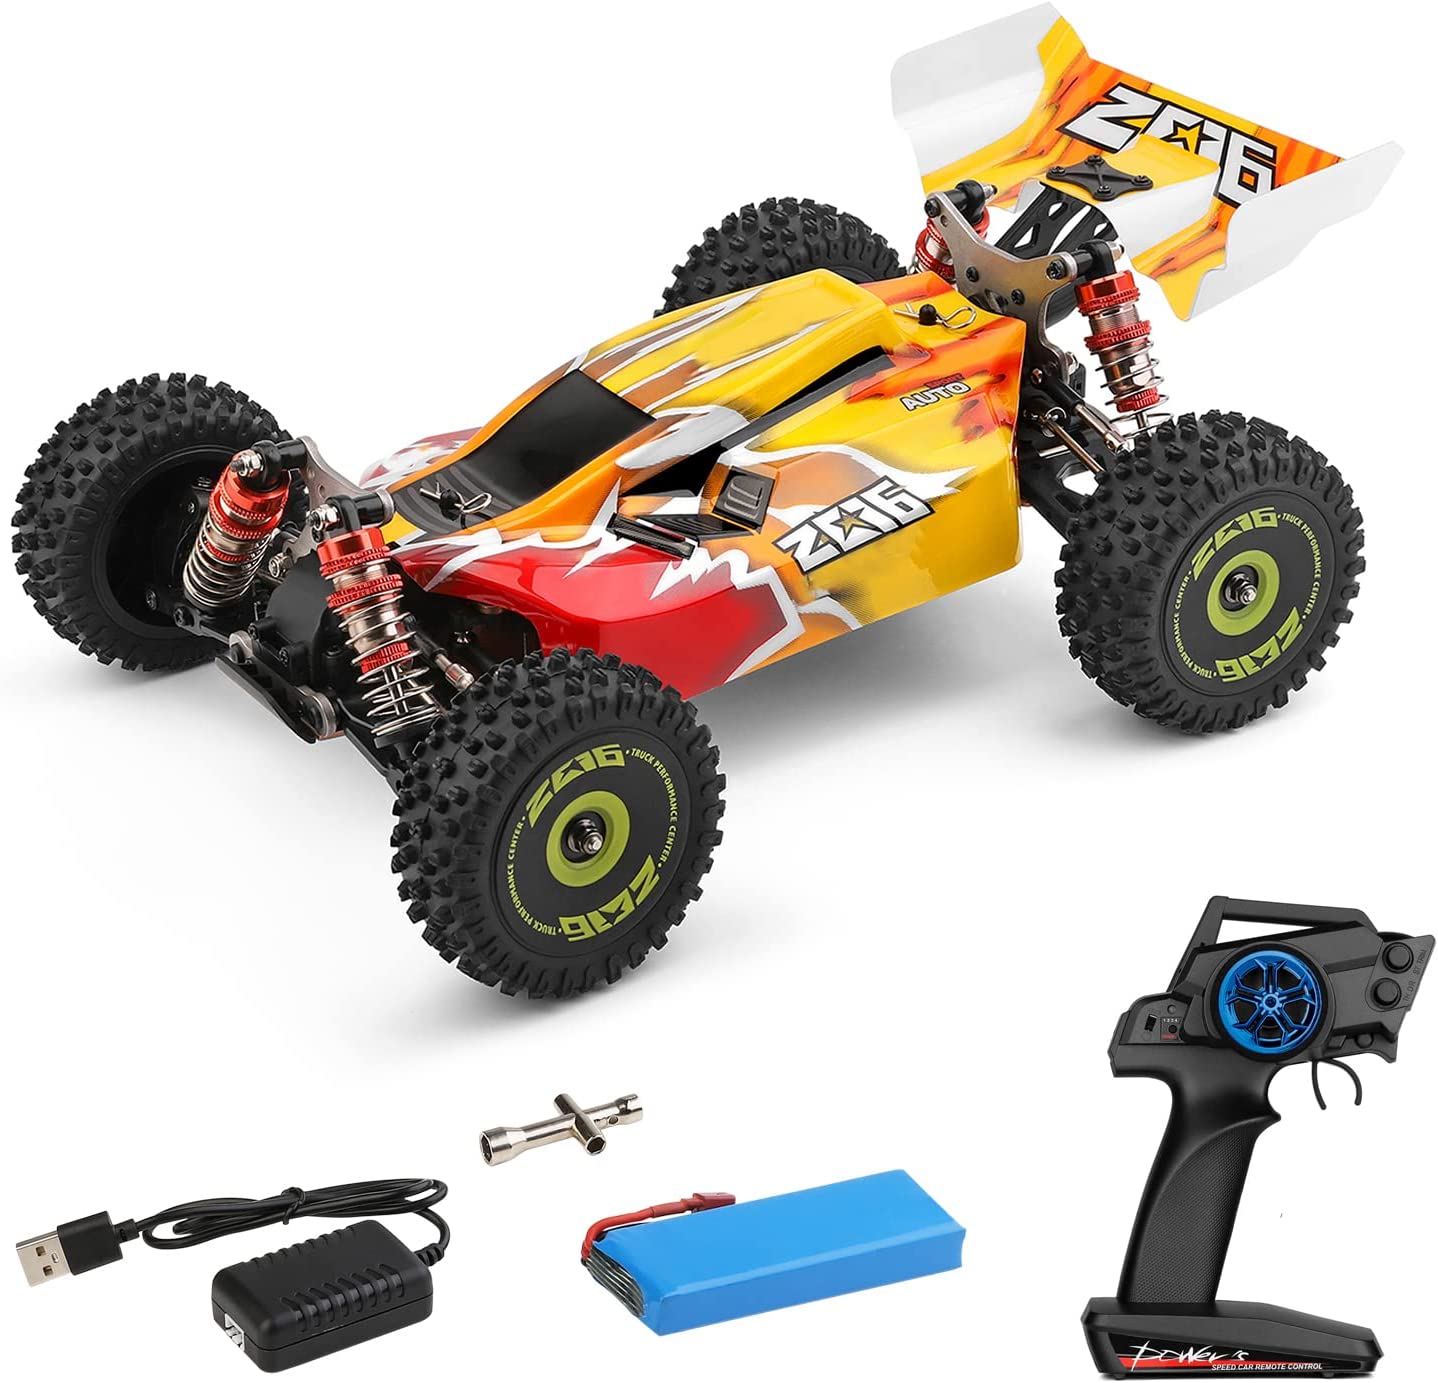 Wl Toys Rc Car 1:14Scale 4Wd Racing Model Series No.144010